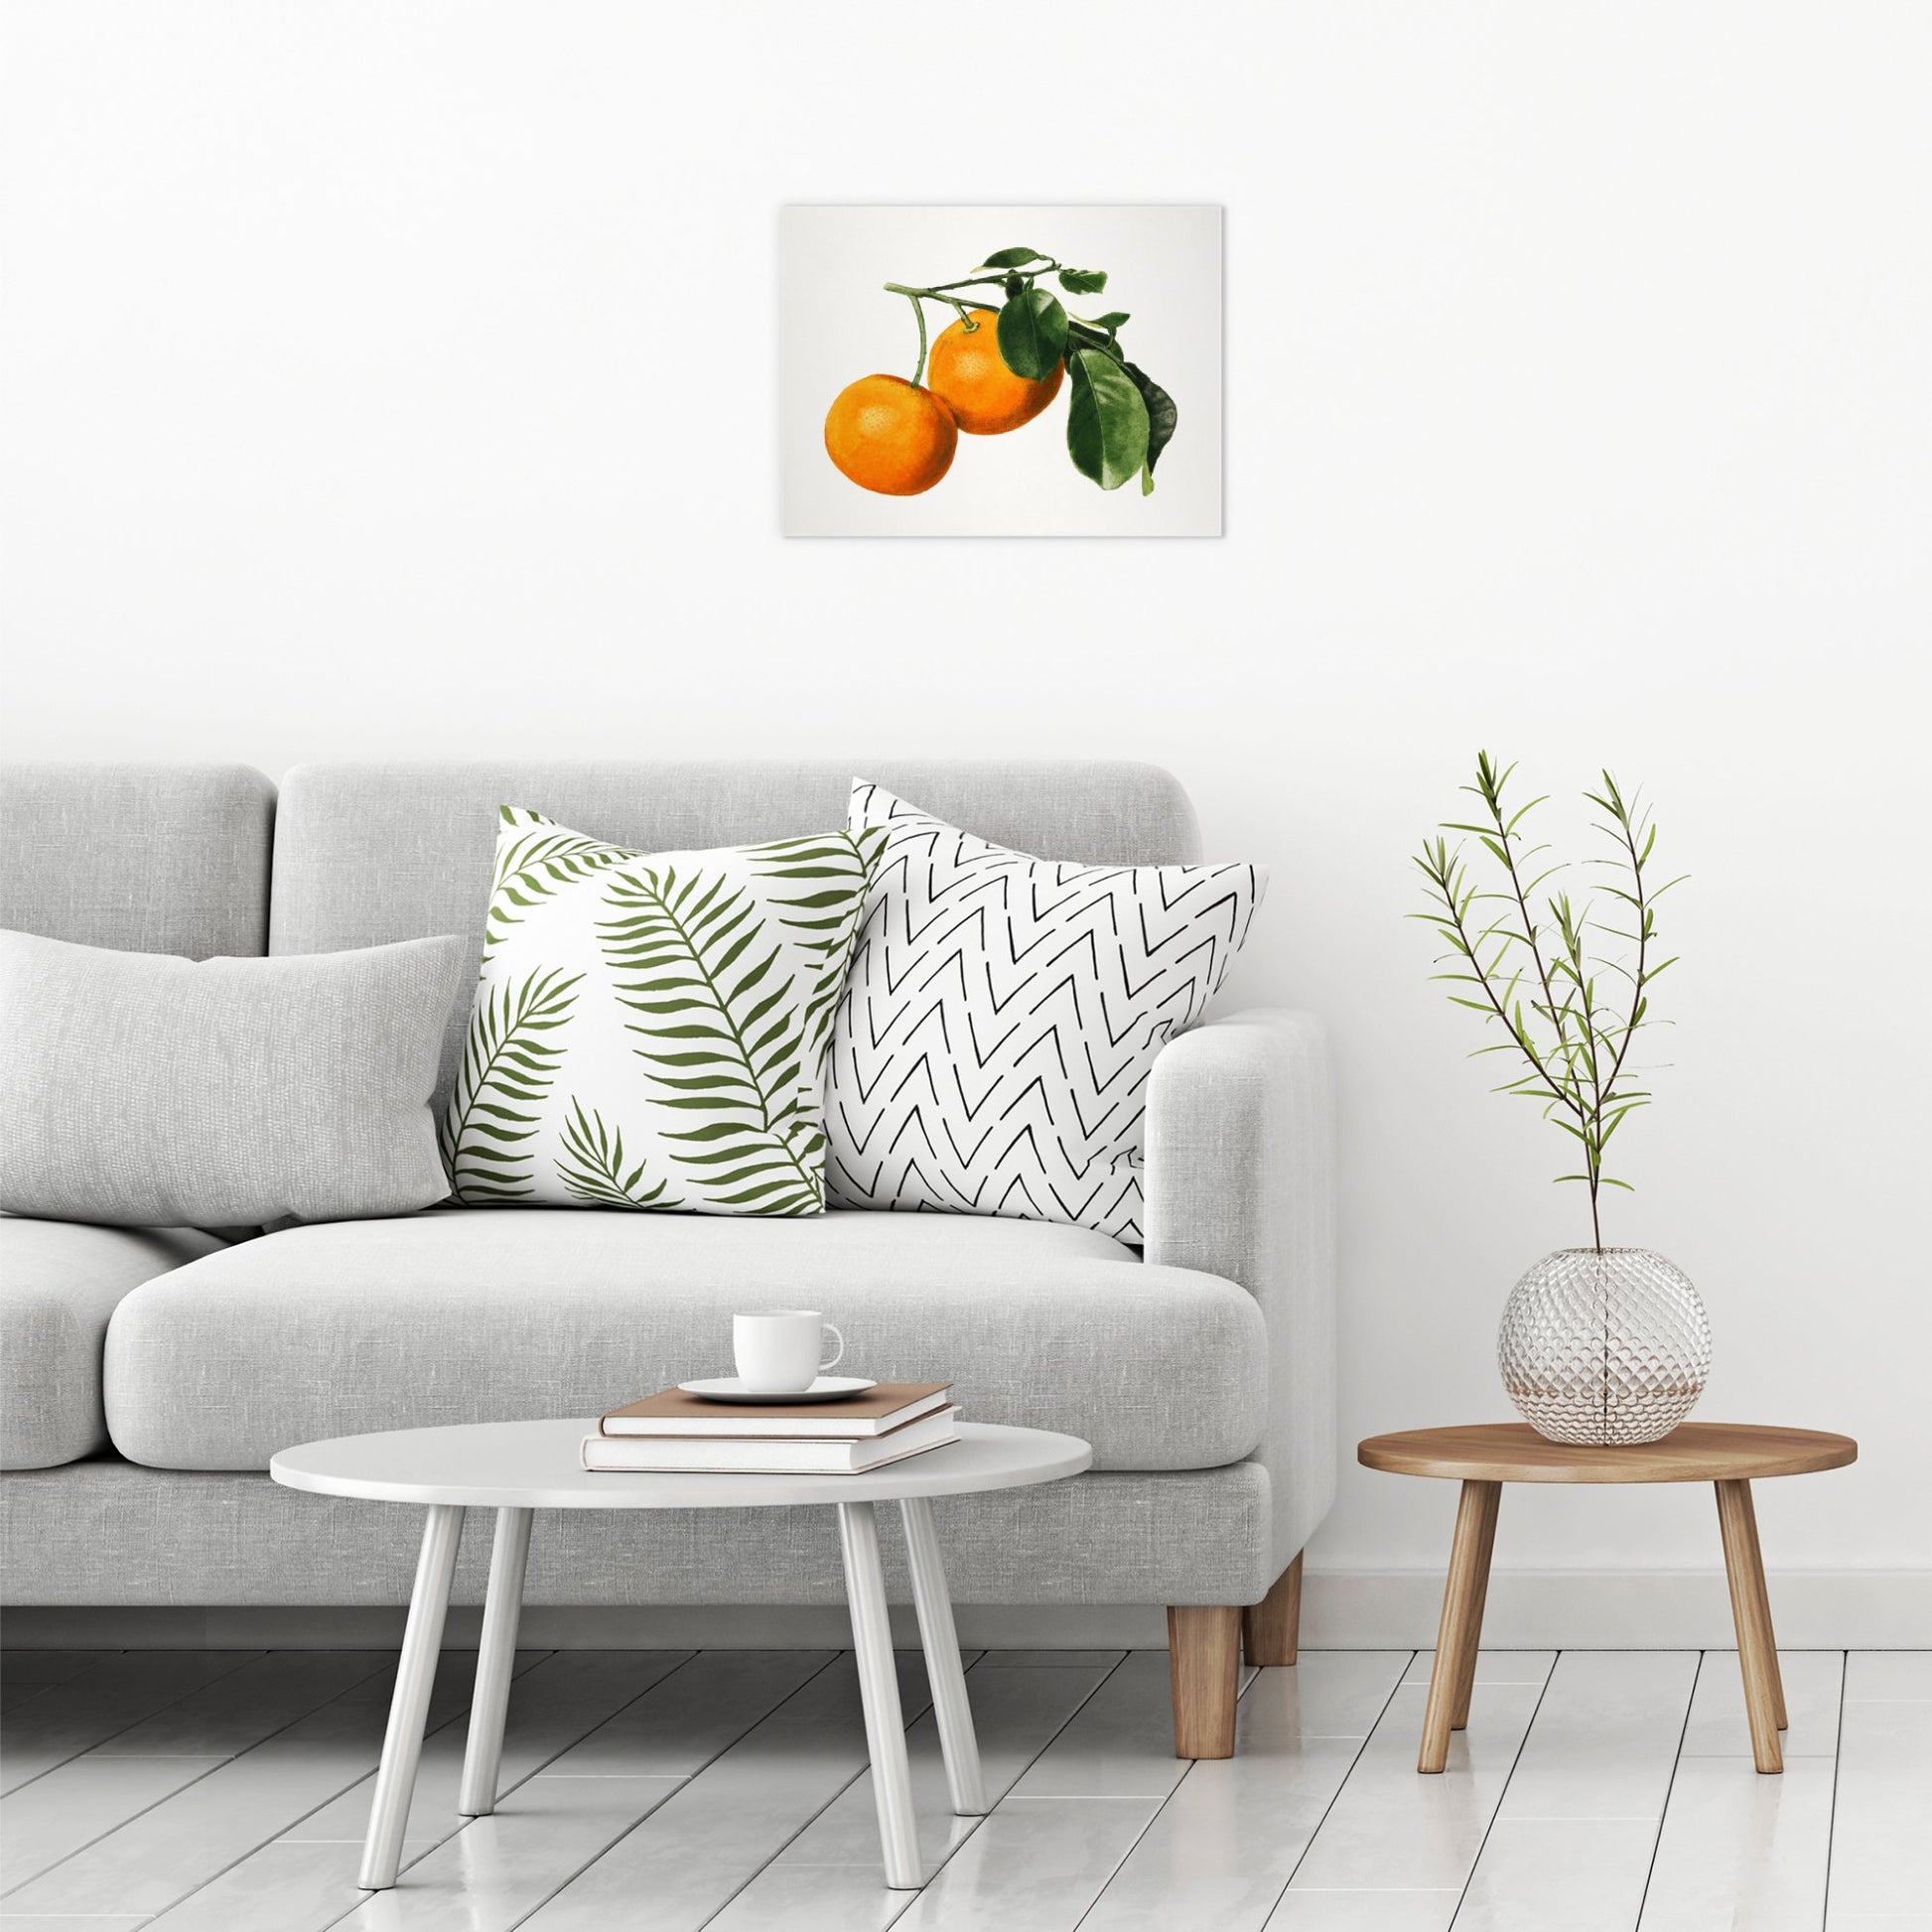 A contemporary modern room view showing a medium size metal art poster display plate with printed design of a Vintage Watercolour Illustration of Oranges